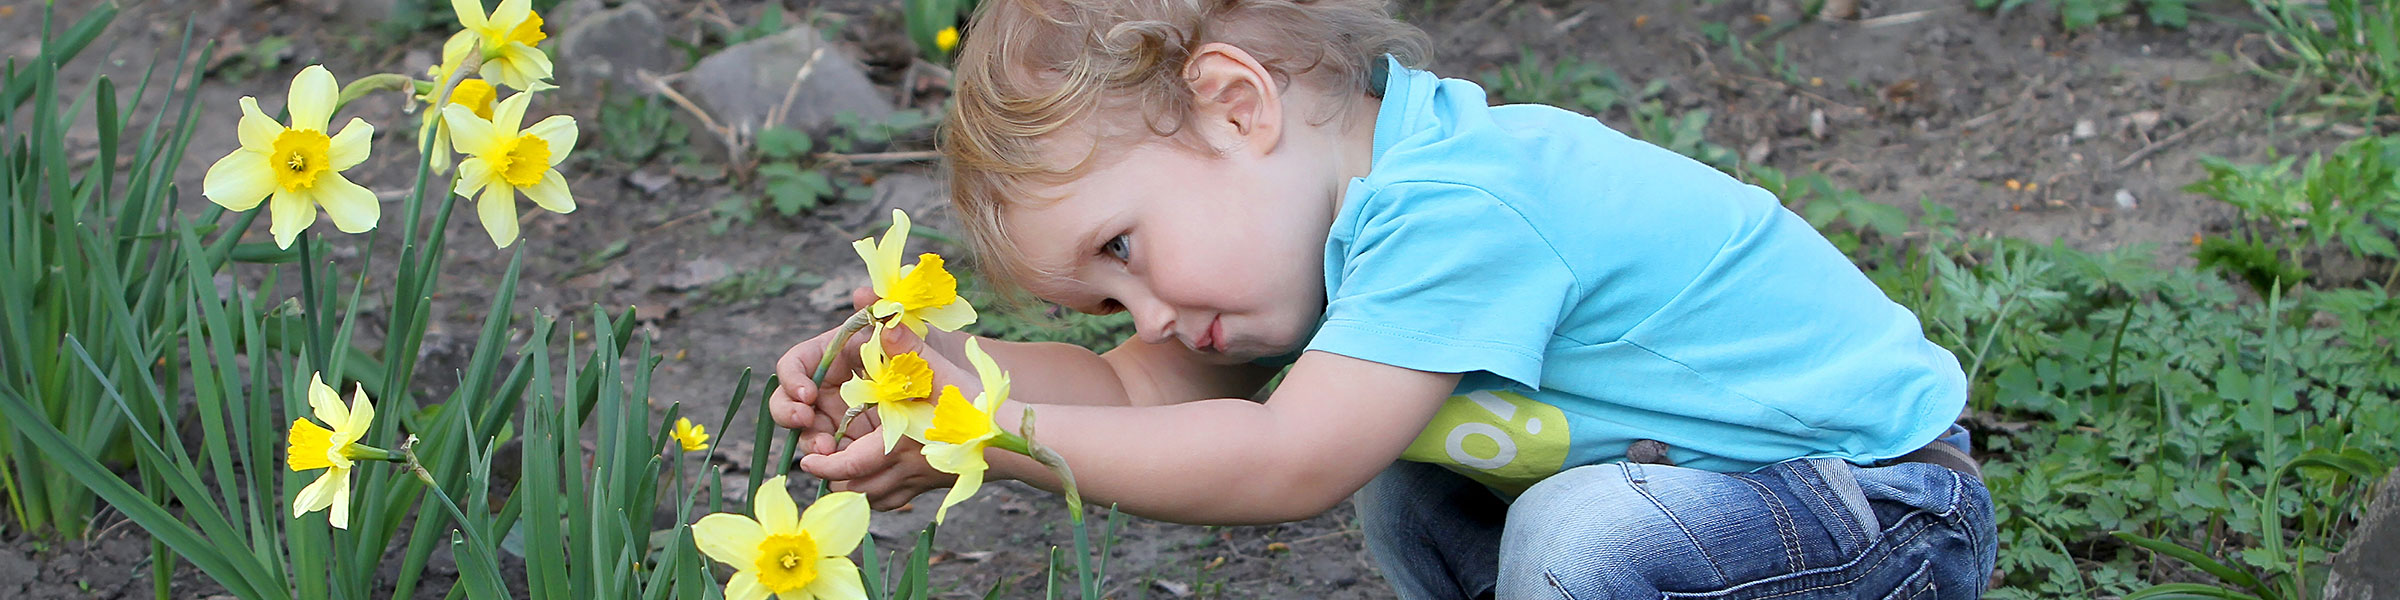 Young child looking at flowers